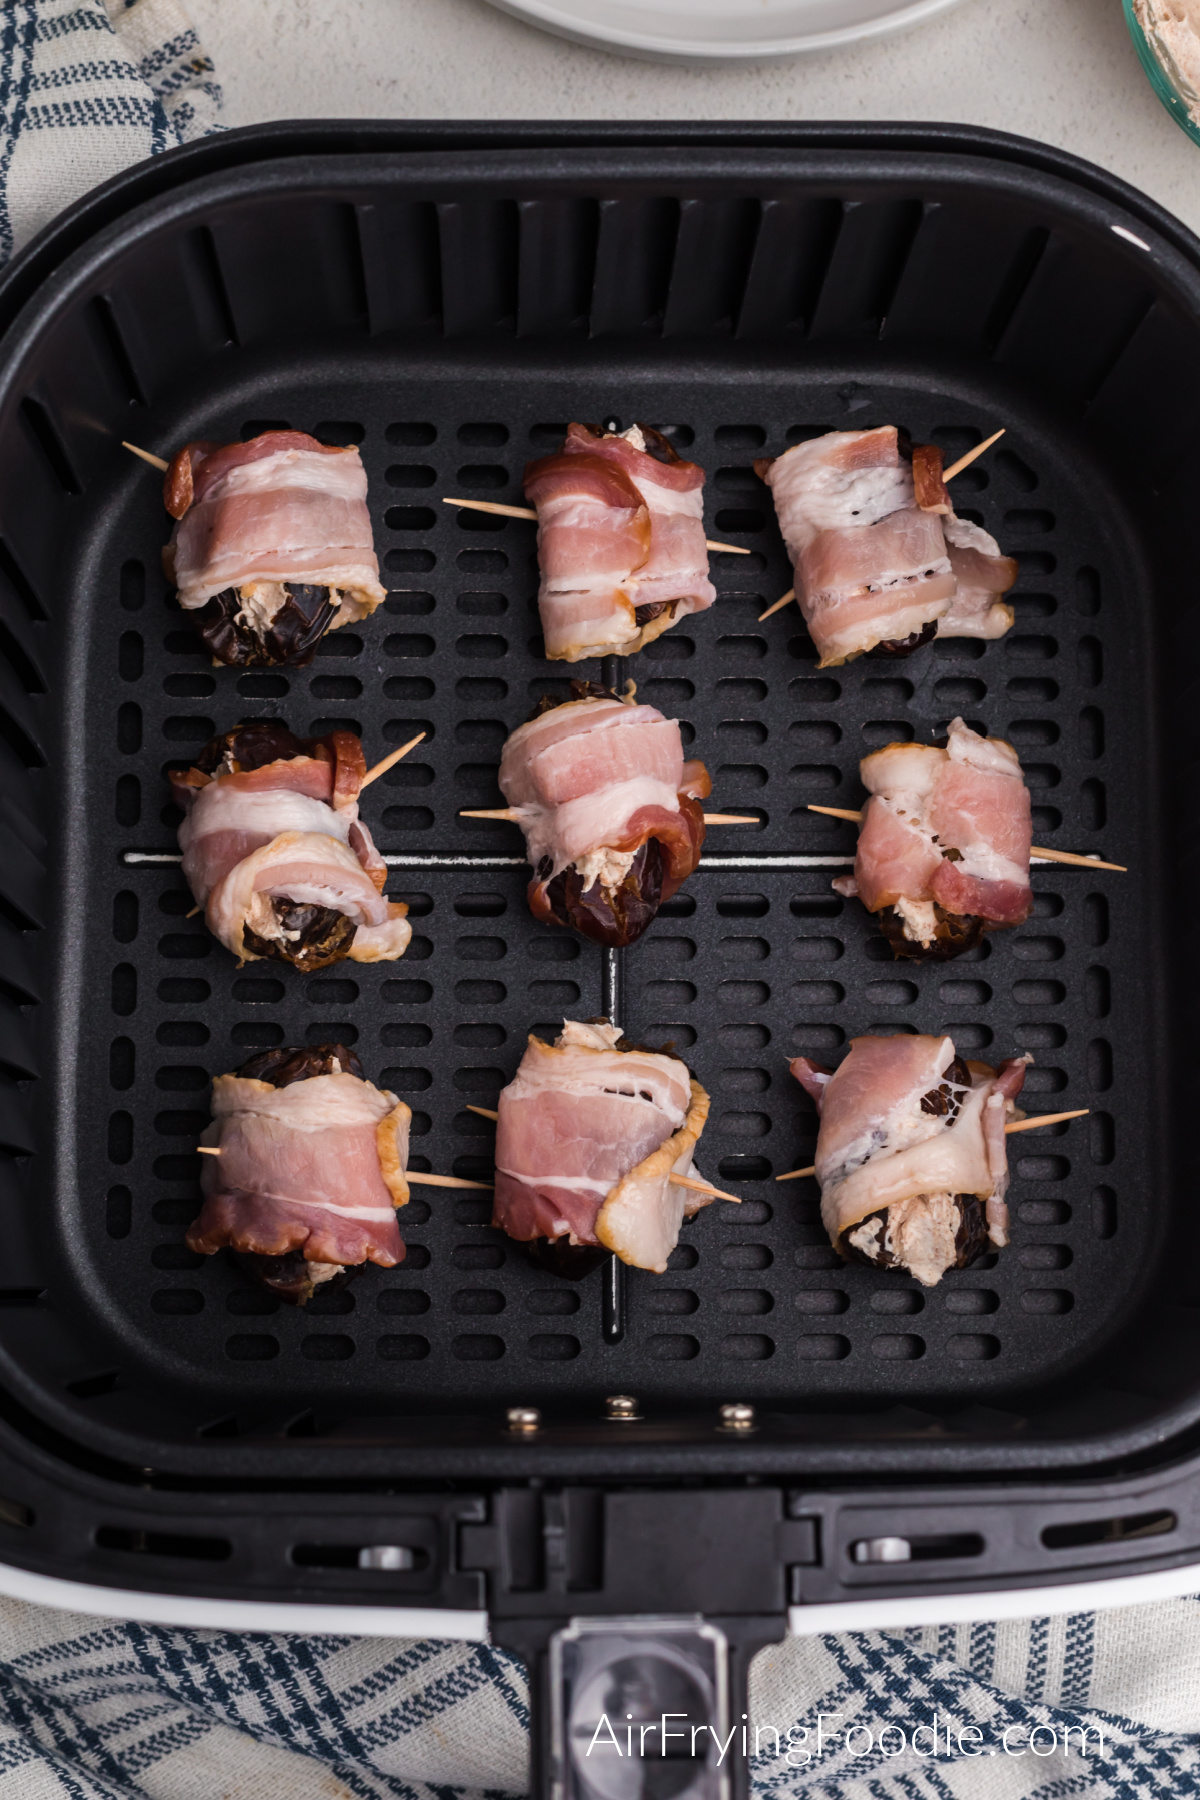 Bacon wrapped dates in the basket of the air fryer.